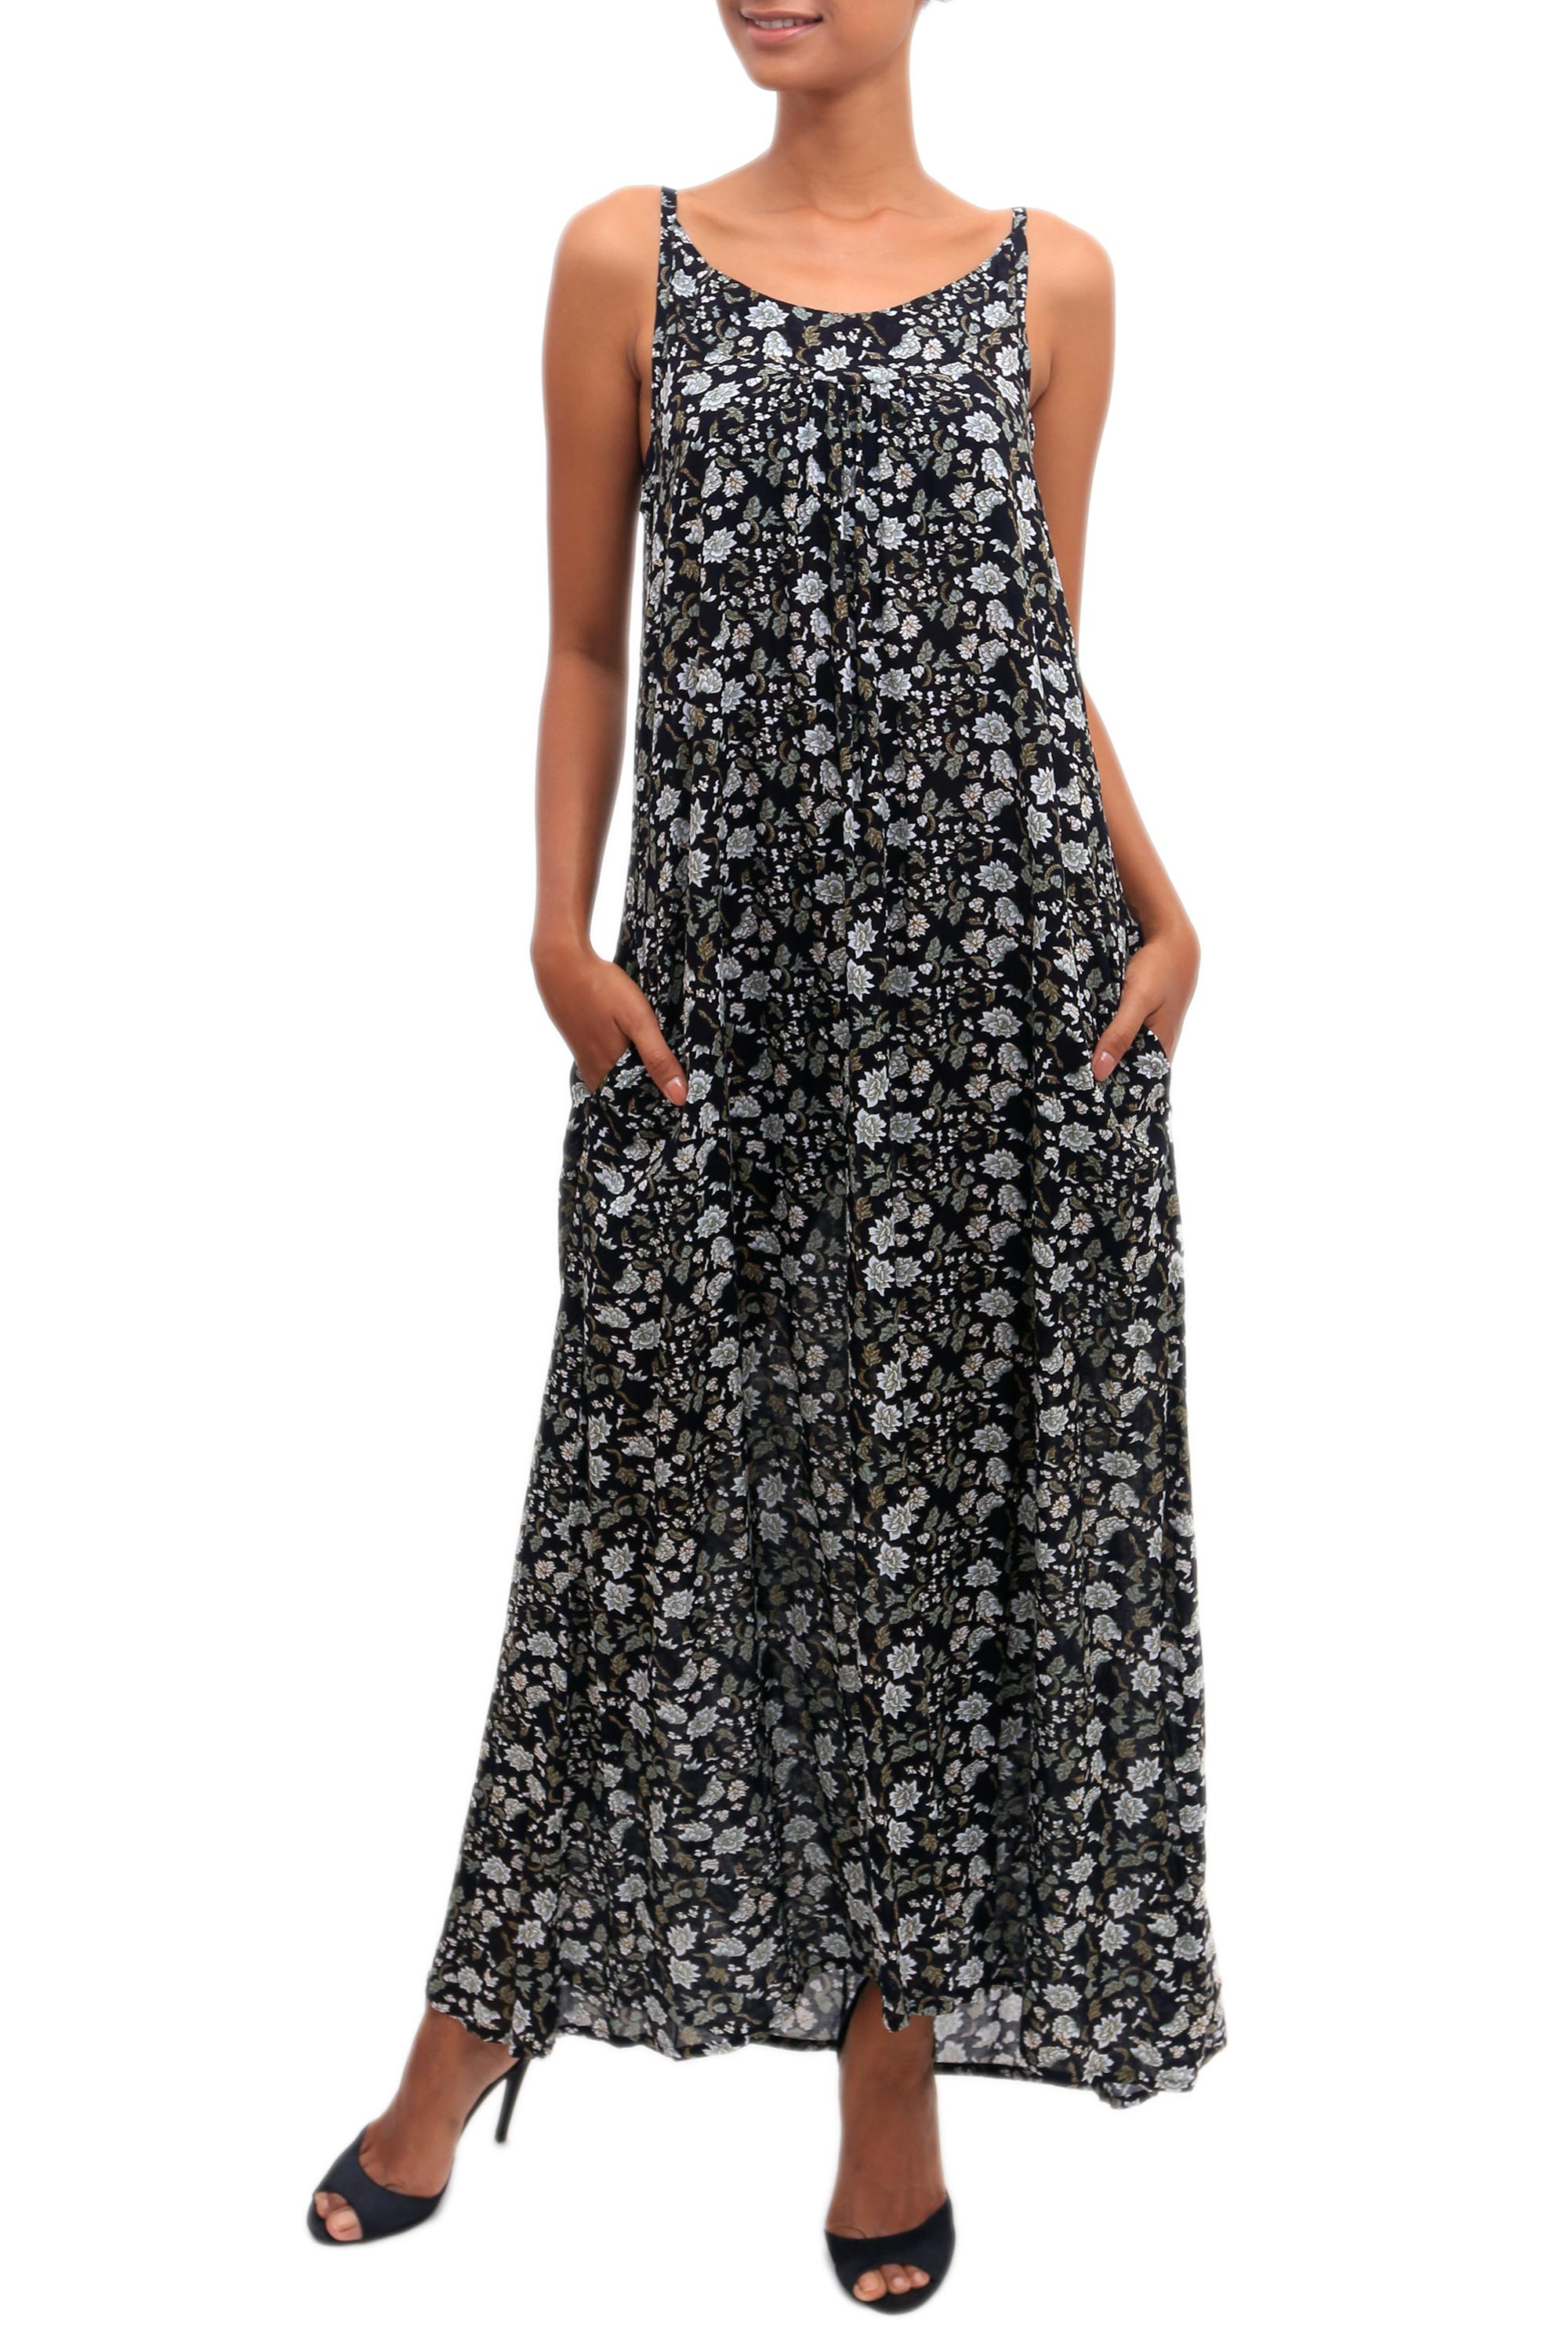 Floral Printed Rayon Maxi Sundress from Bali - Venus Flowers | NOVICA